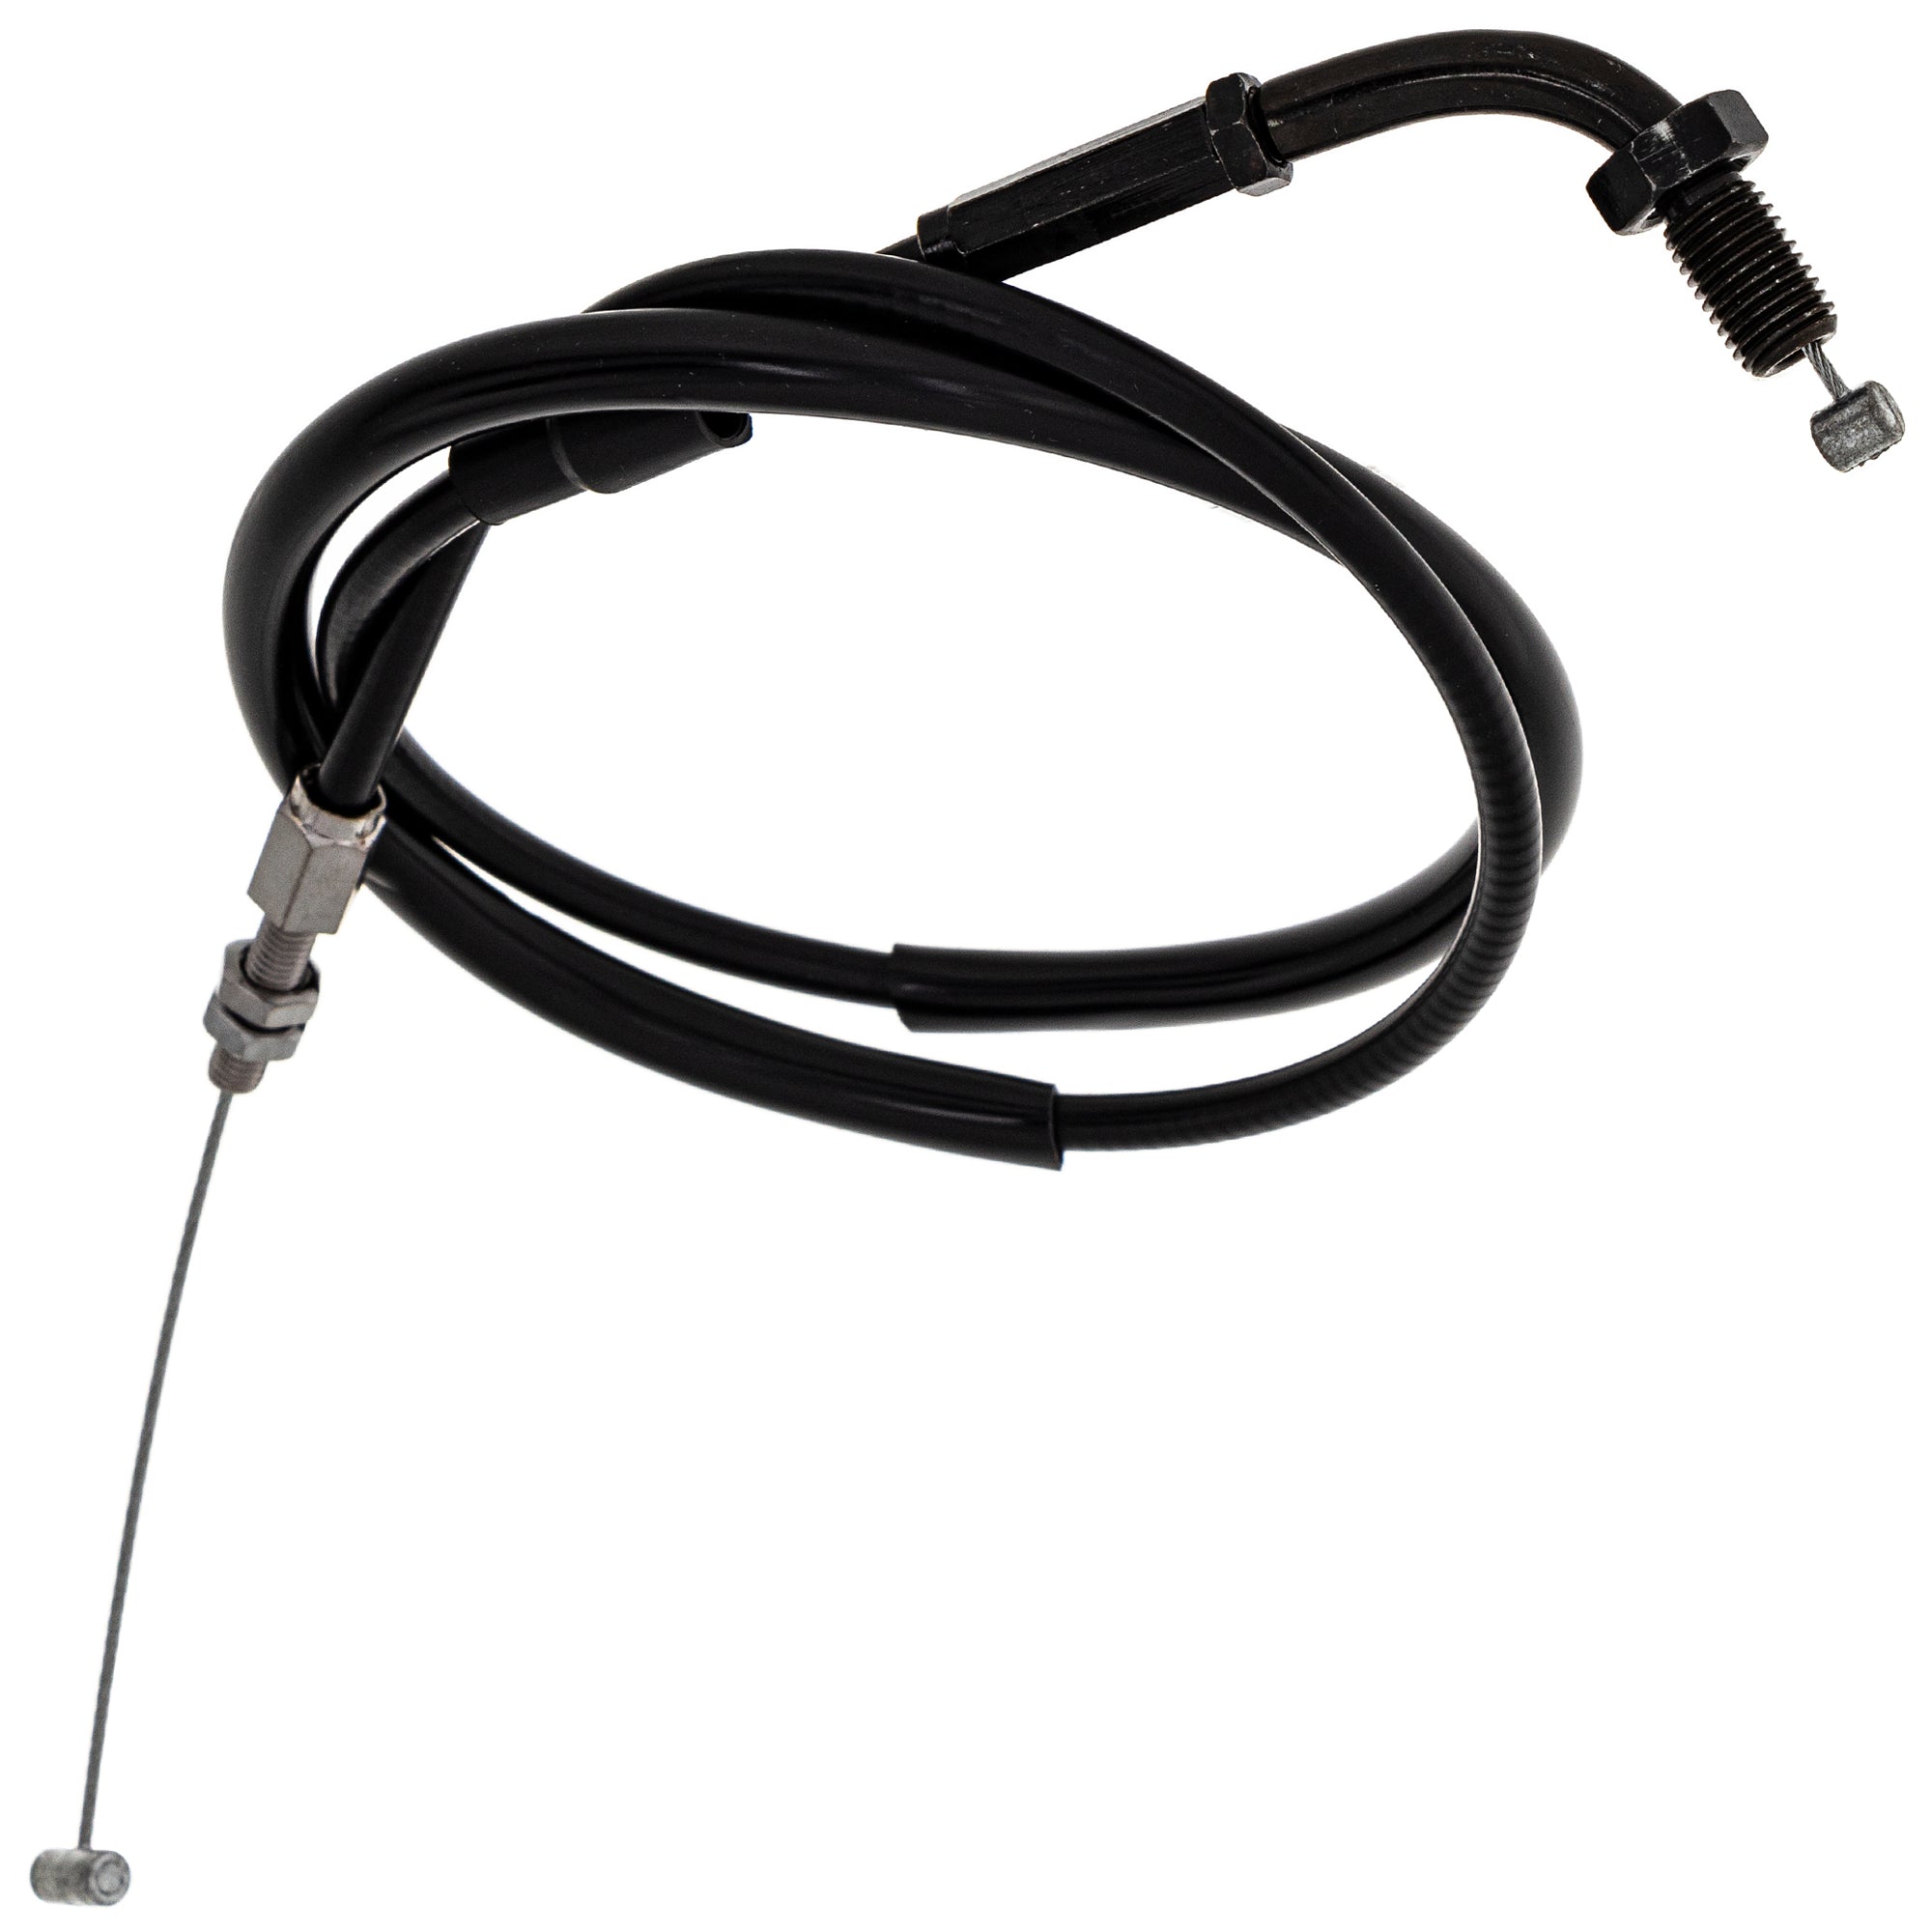 Pull Throttle Cable For Honda 17910-MZ1-000 17910-MW3-P00 17910-MW3-670 17910-MK7-000 17910-ME5-770